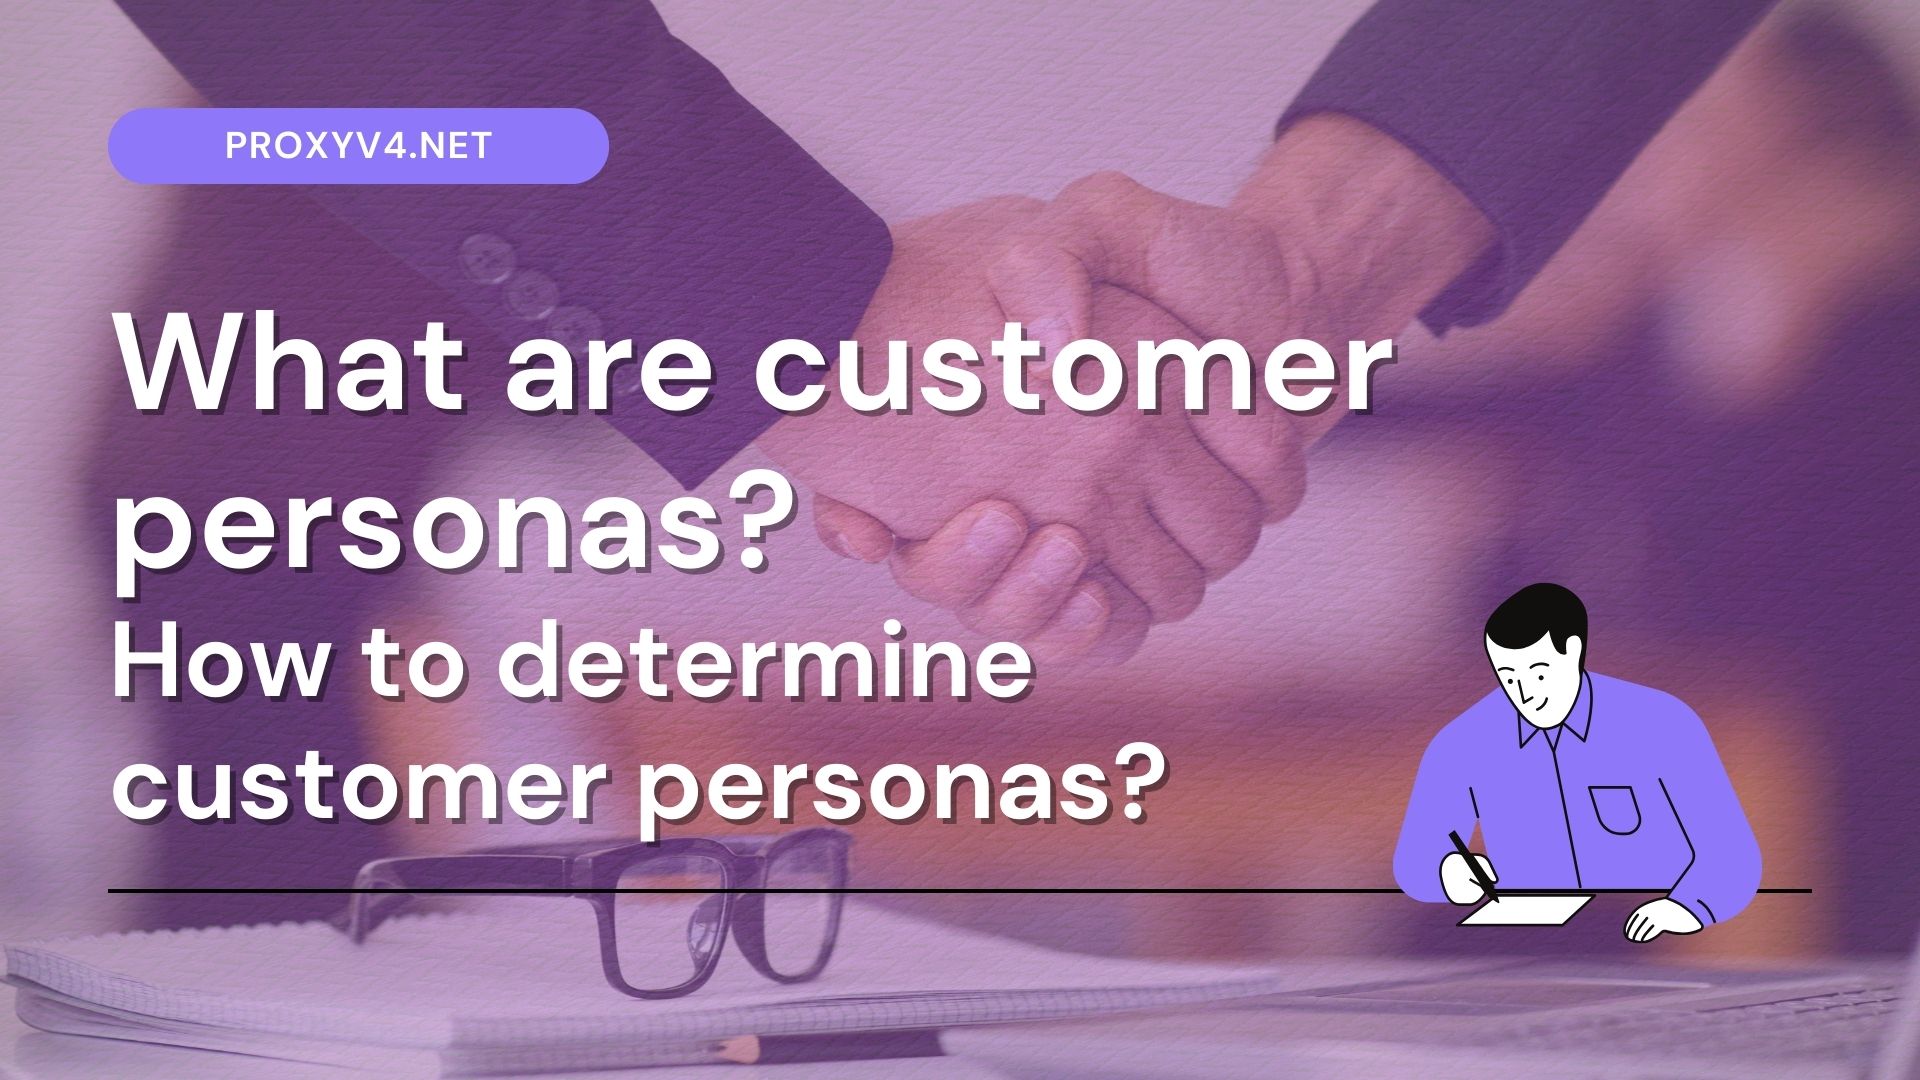 What are customer personas? How to determine customer personas